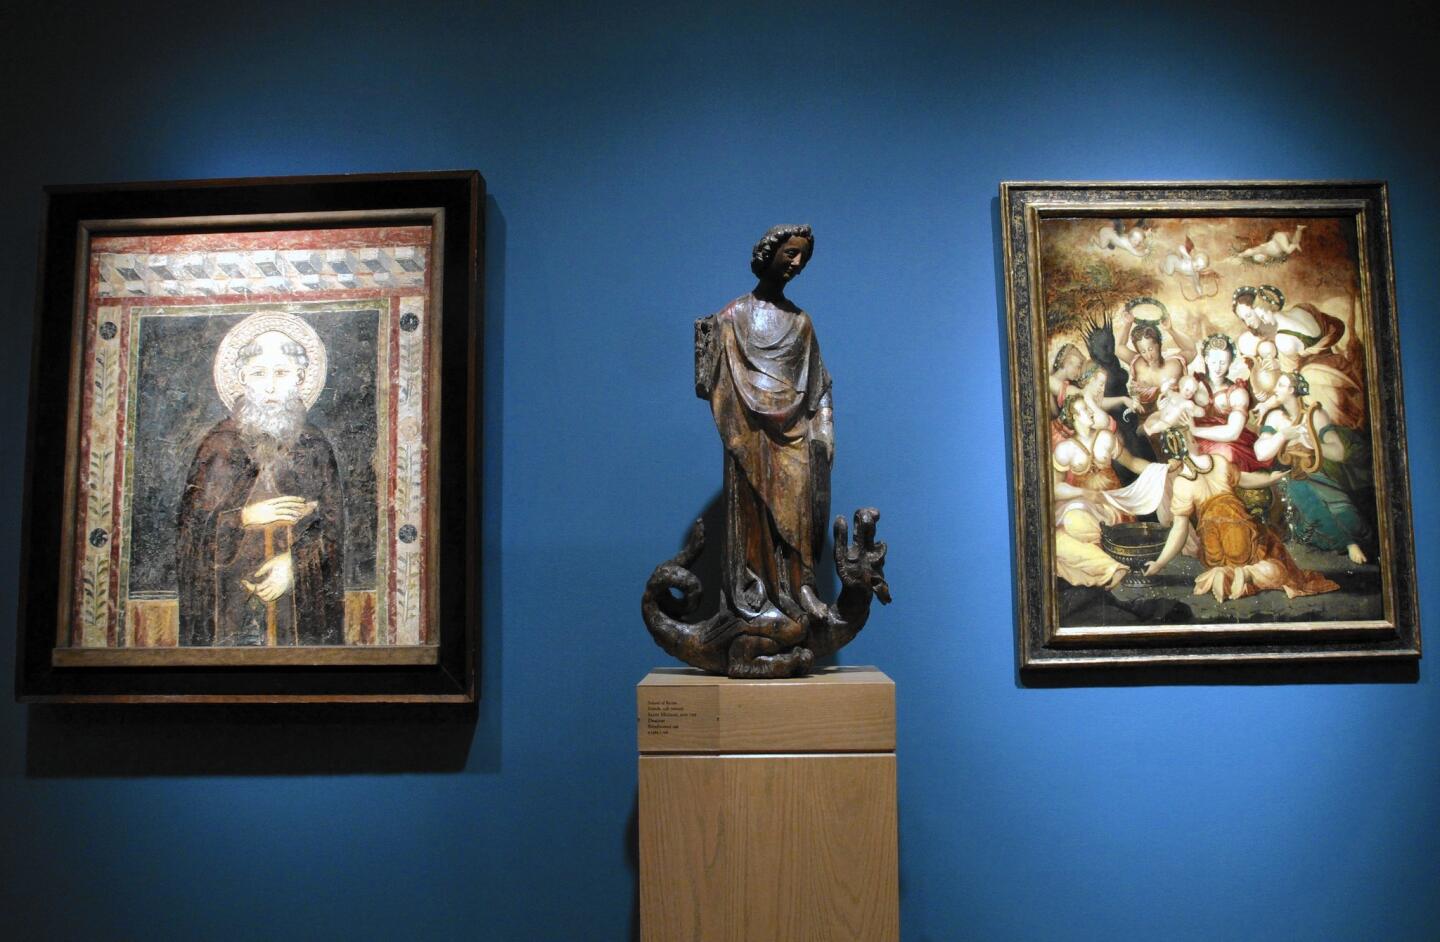 In 1964, Norton Simon purchased the entire inventory of the Duveen Brothers gallery in New York. Among the holdings was a 14th century fresco of St. Anthony, from left, the 13th/14th century "St. Michael and the Dragon as Virtue Overcoming Vice" and the 16th century "The Birth of Adonis." They are shown in "Lock, Stock and Barrel," focusing on the purchase, at the Norton Simon Museum in Pasadena.